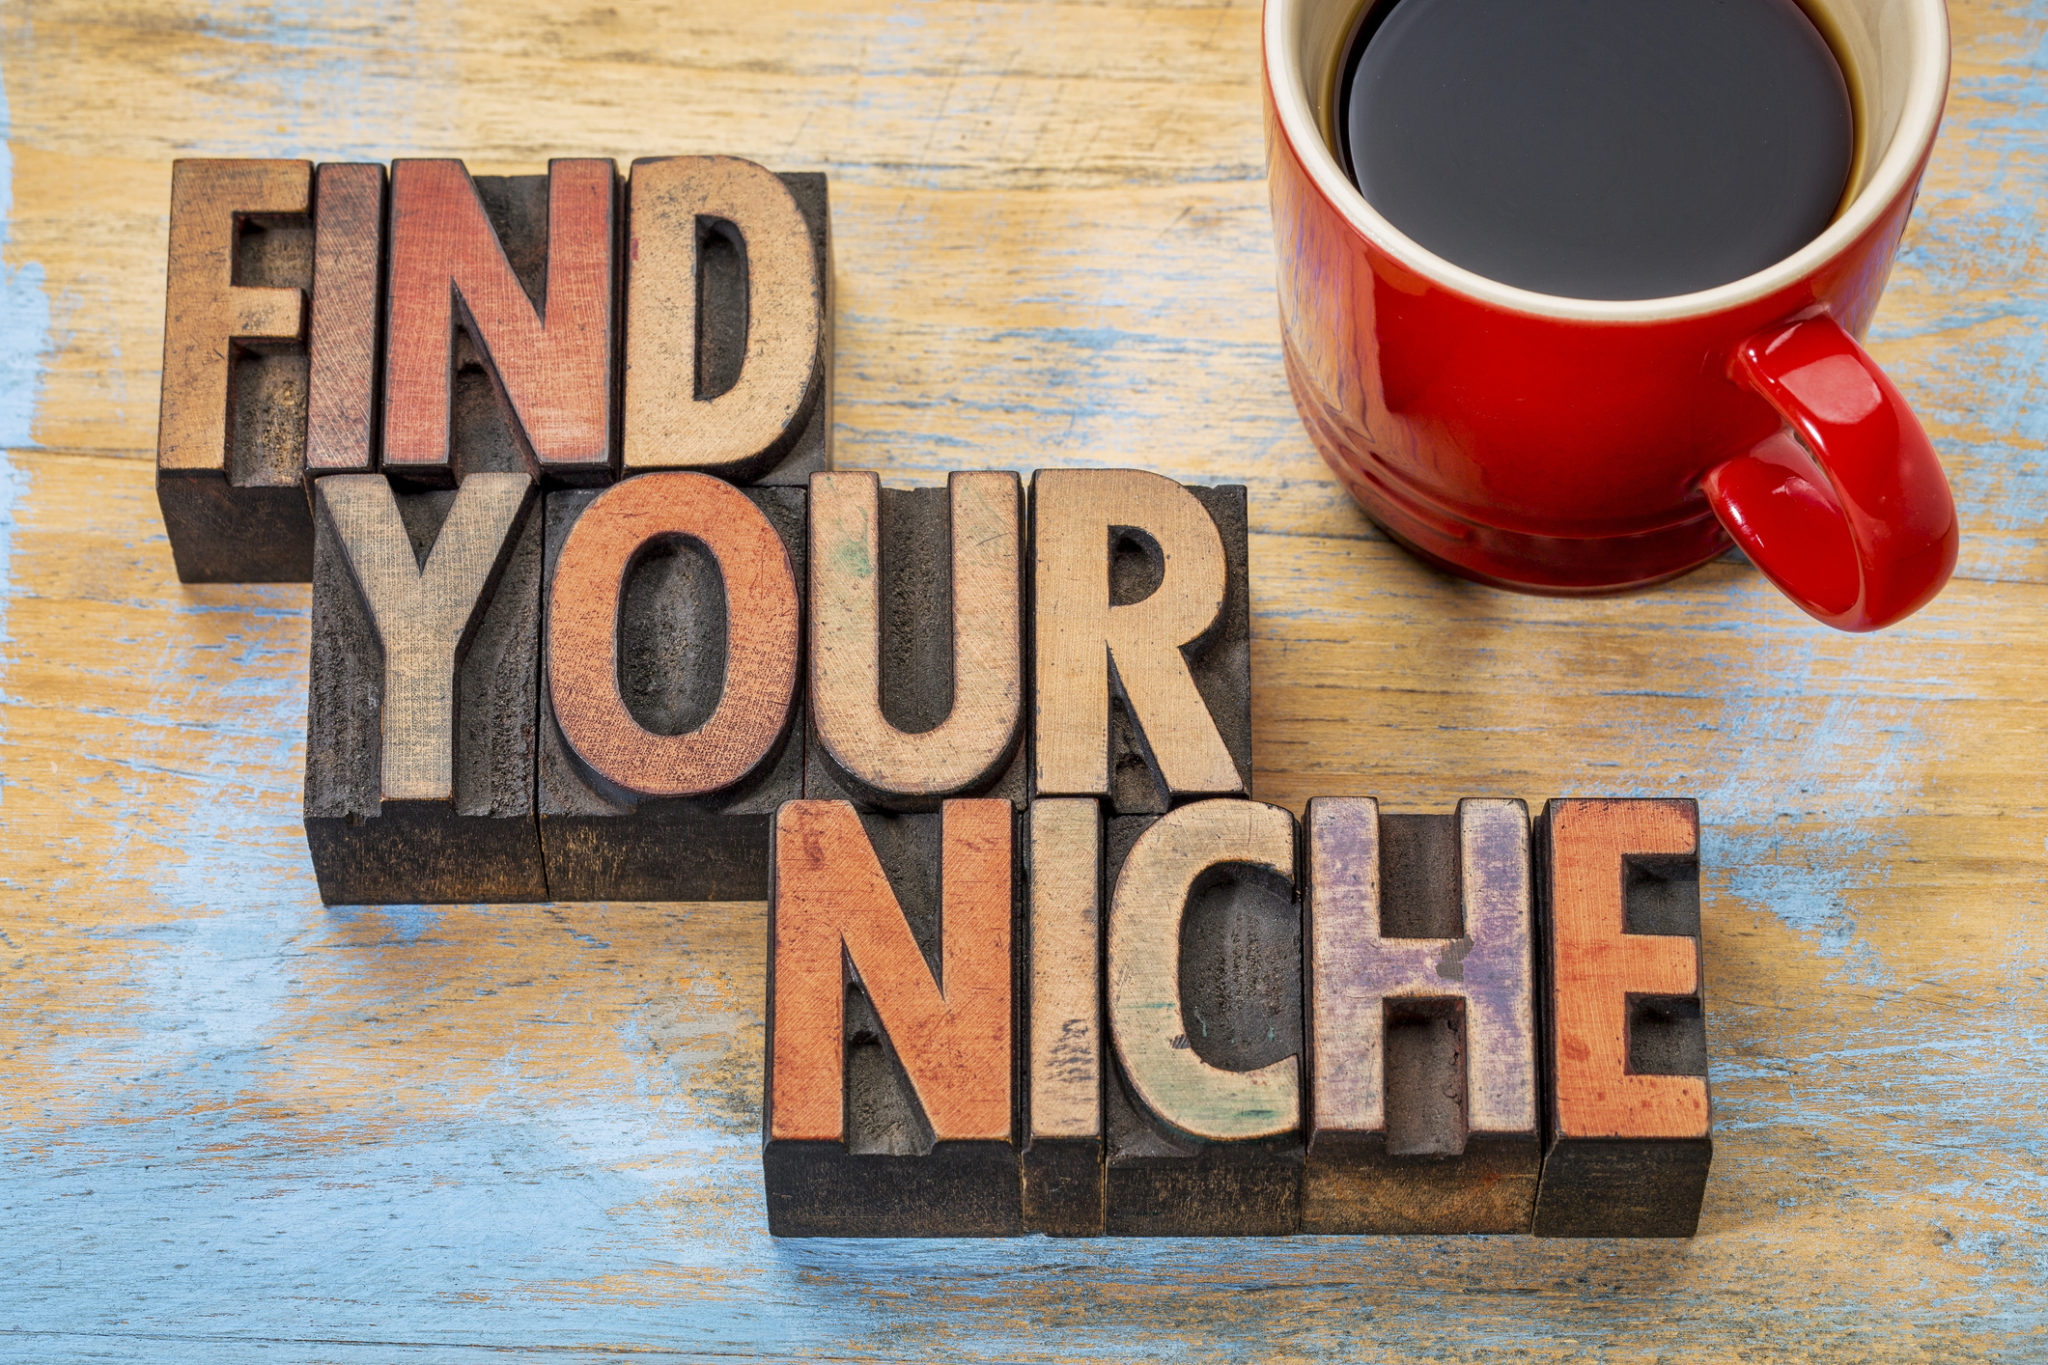 Find your niche word abstract